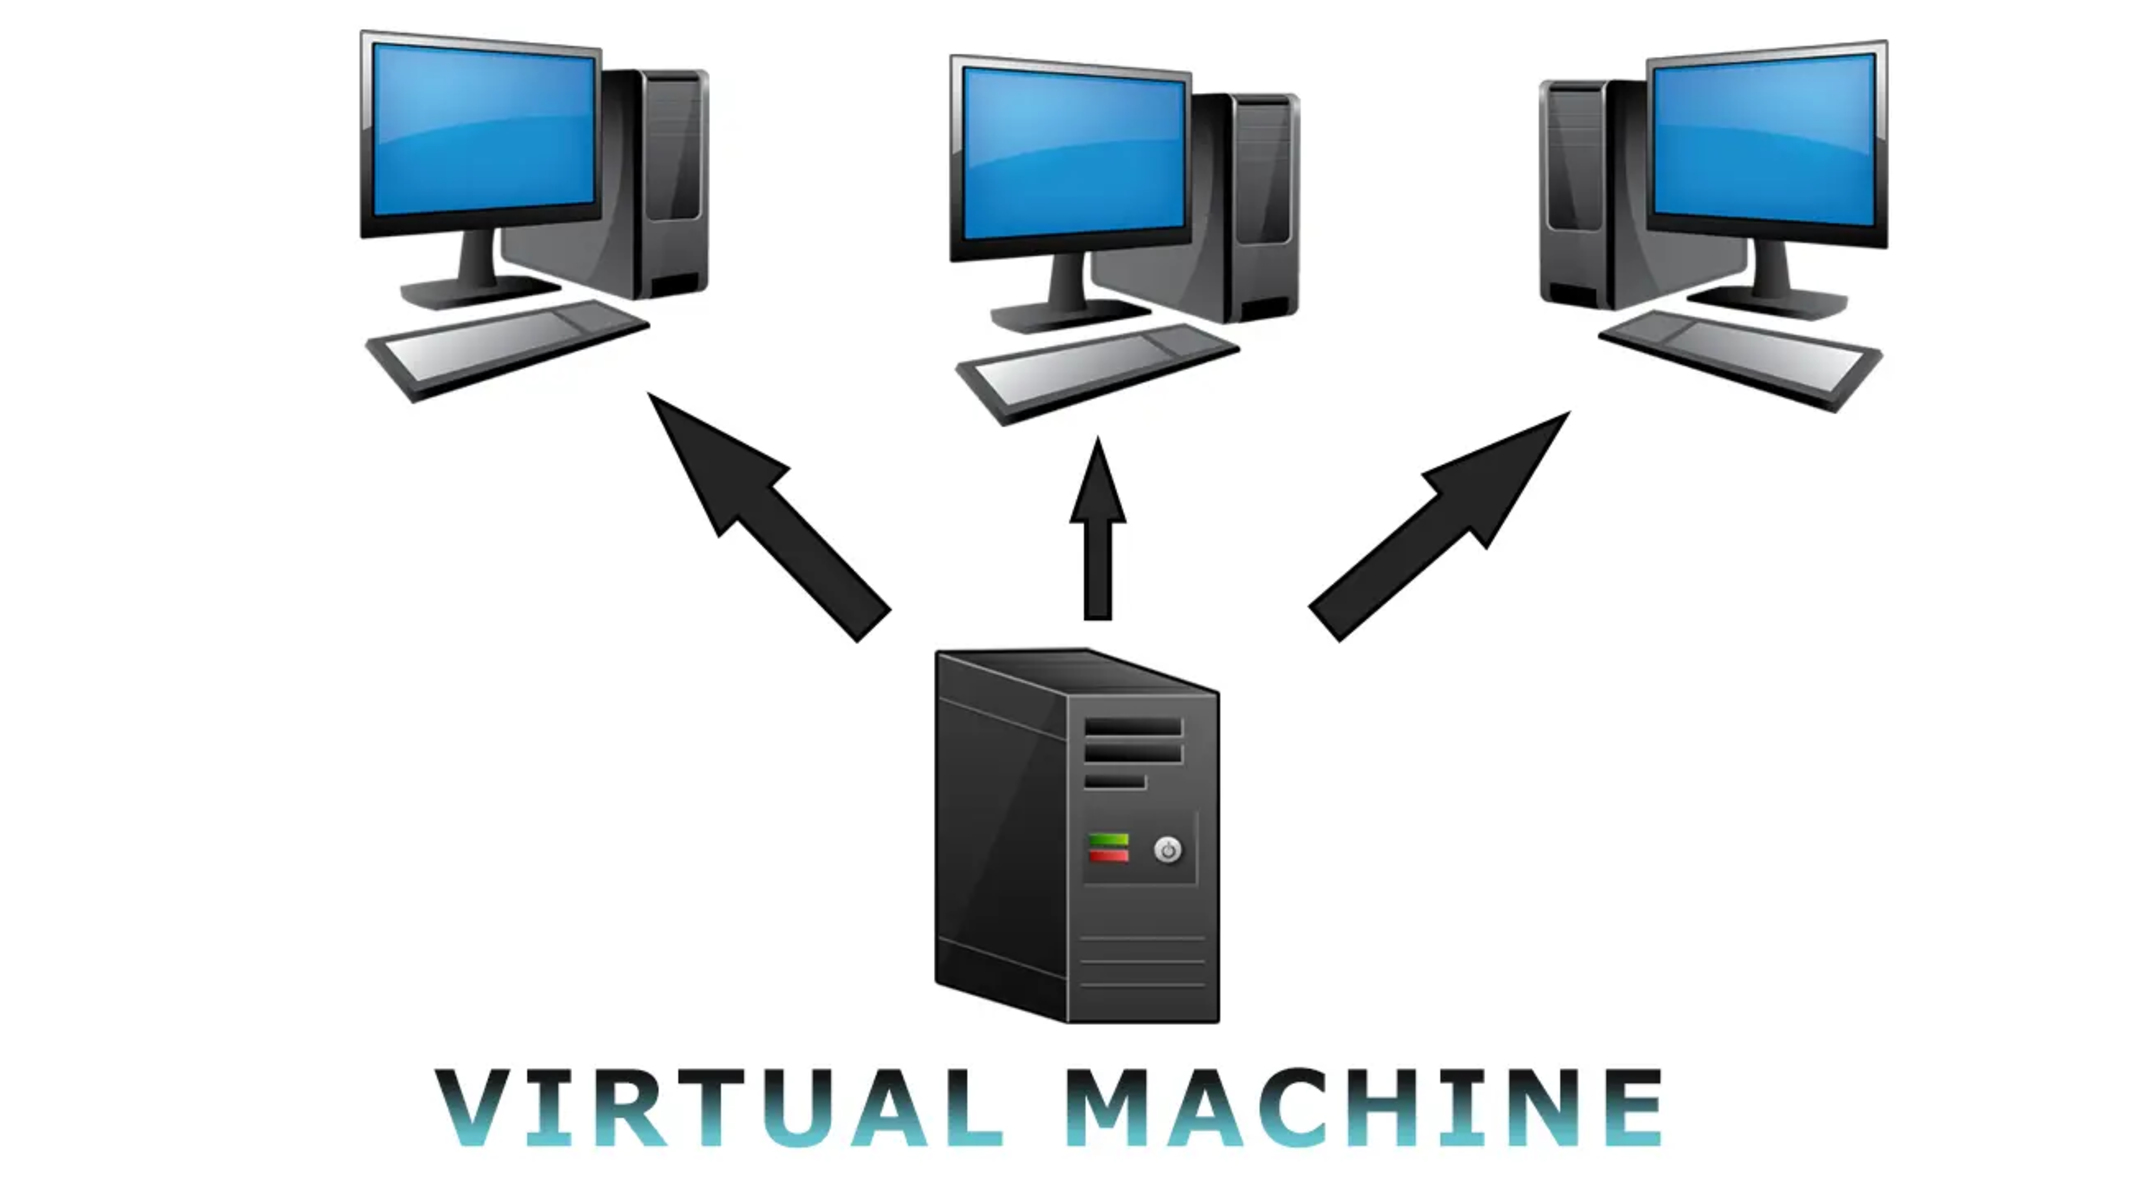 How To Add Muliple Virtual Machines At Once With VMware Workstation 14.0